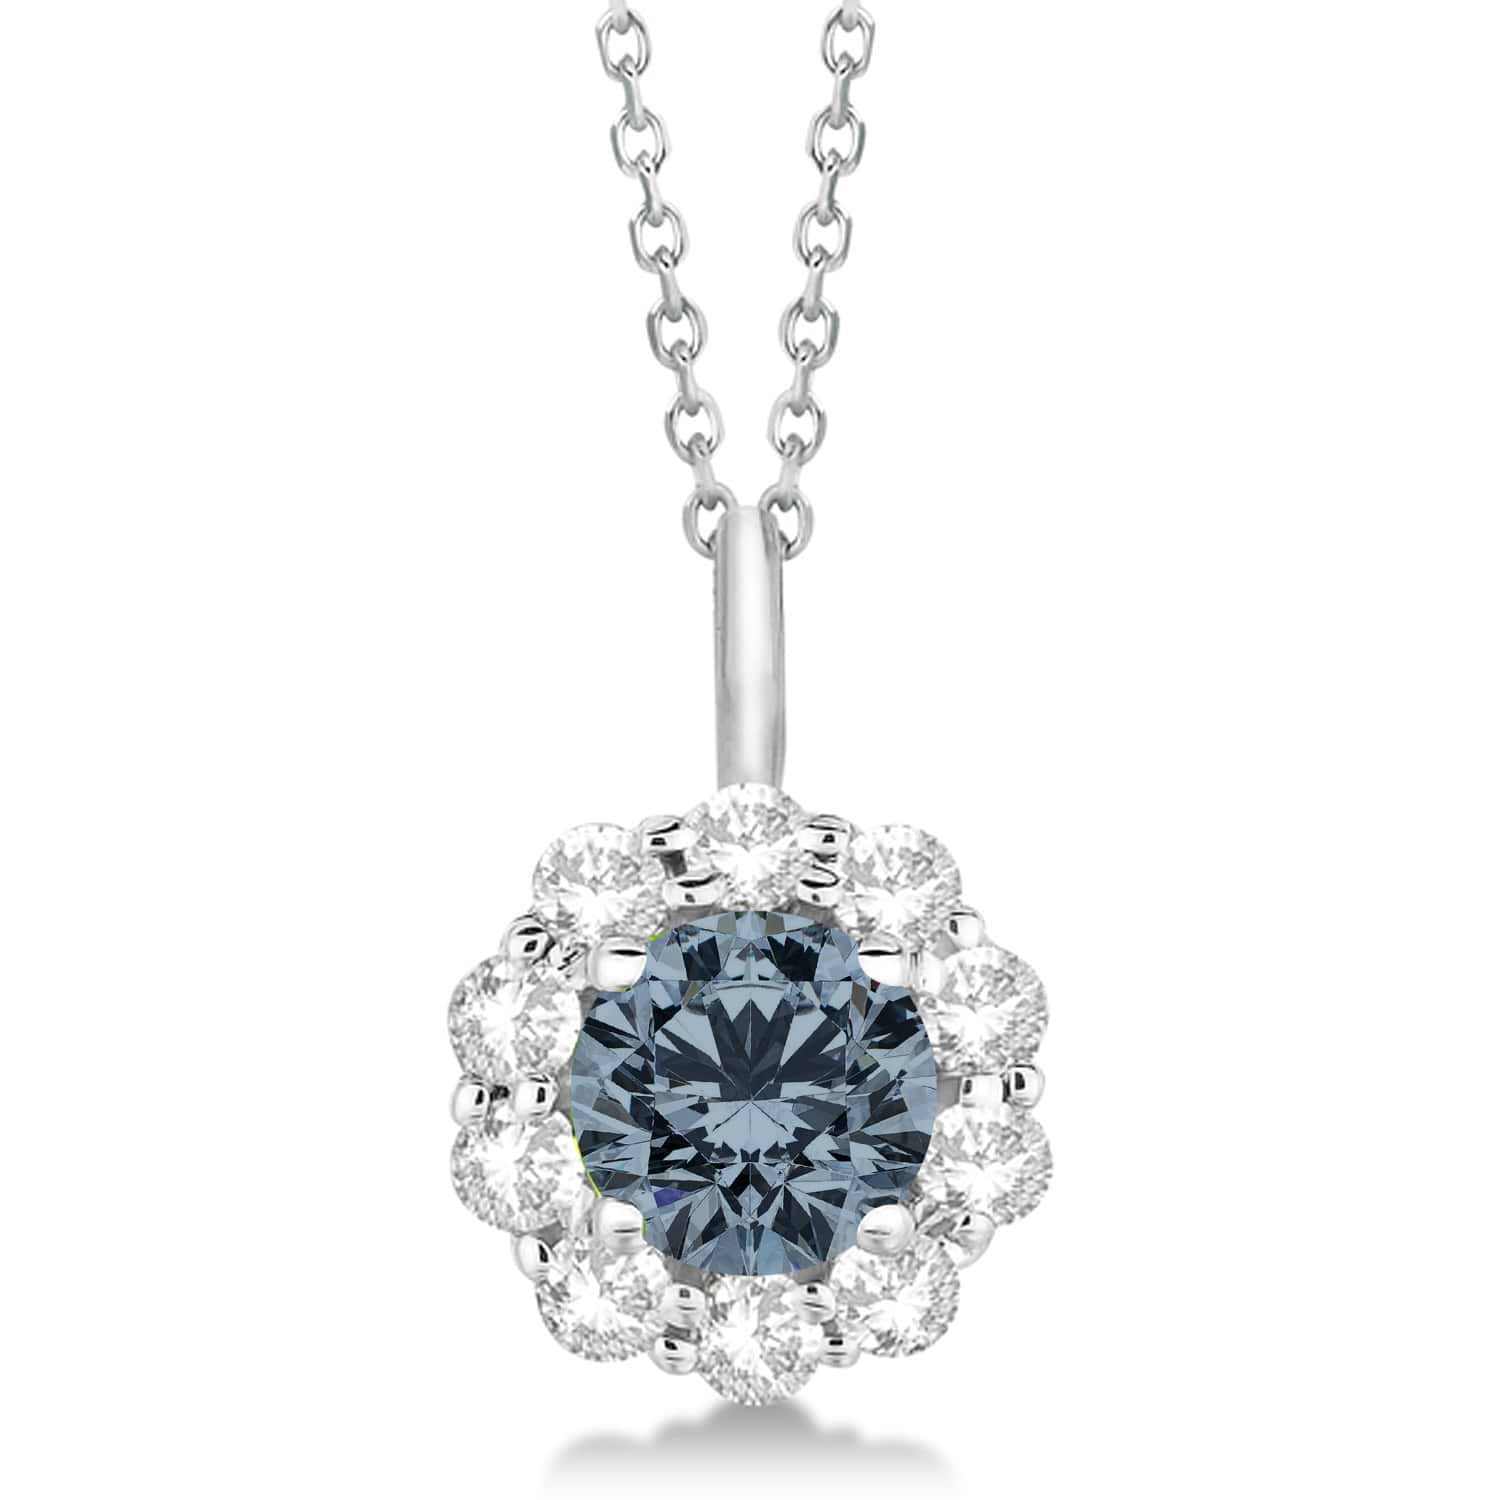 Halo Diamond and Gray Spinel Lady Di Pendant Necklace 18k White Gold (1.69ct)